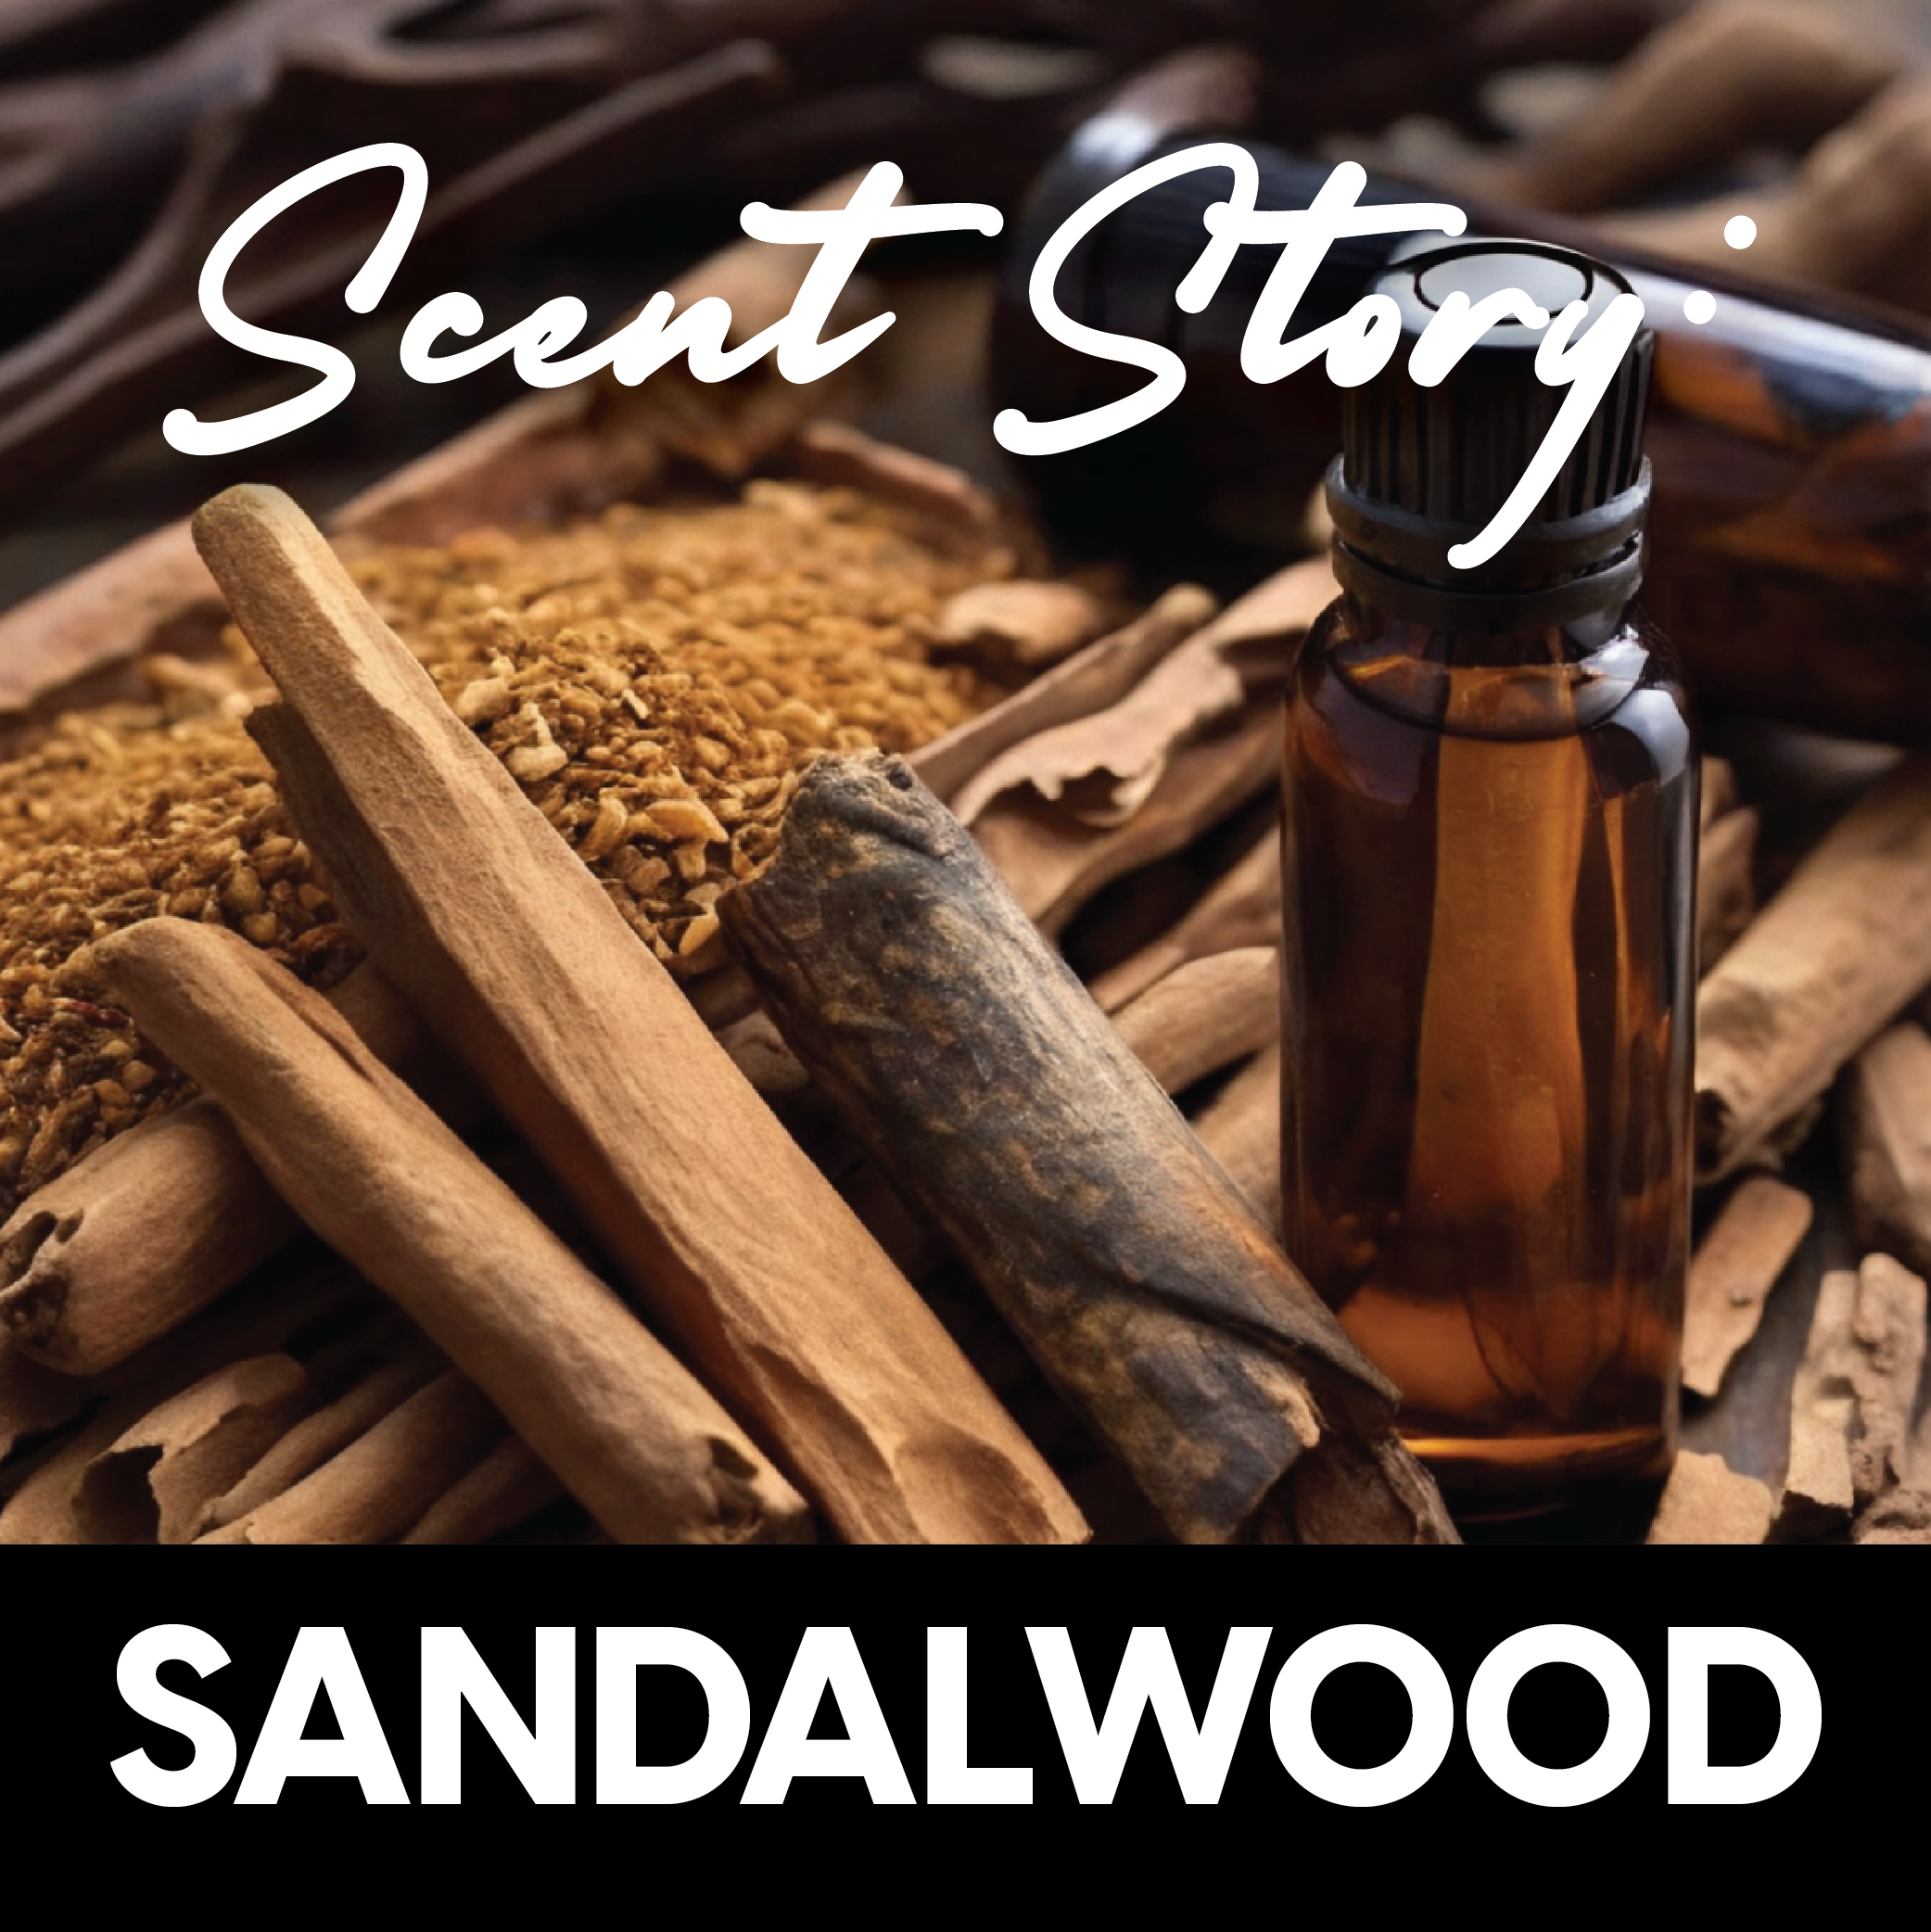 Scent Story: What Does Sandalwood Smell Like?